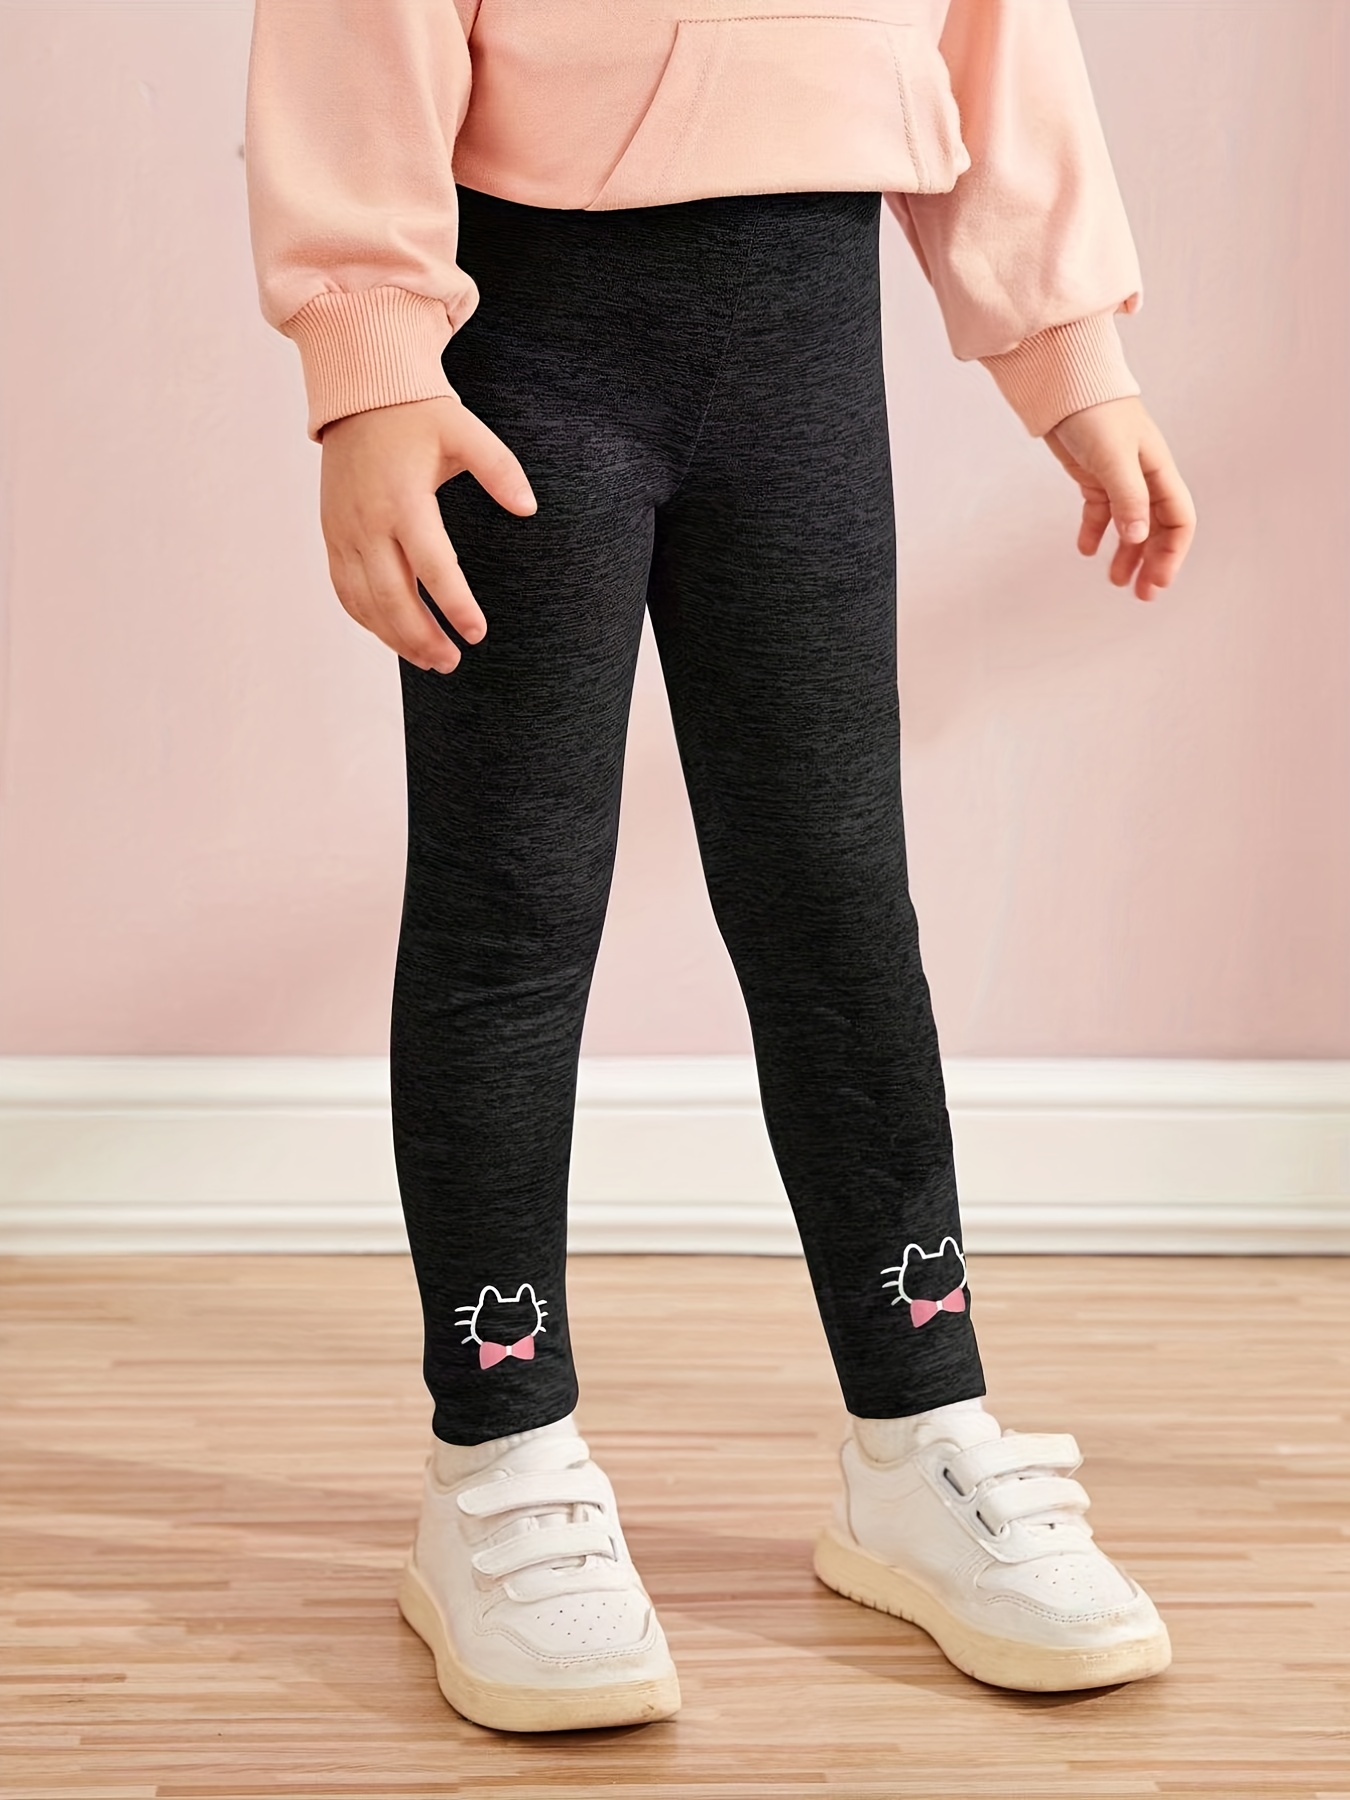 Toddler Girls Cute Cartoon Bow Cat Graphic Stretch Leggings Casual Skinny  Pants Kids Spring Summer Clothes